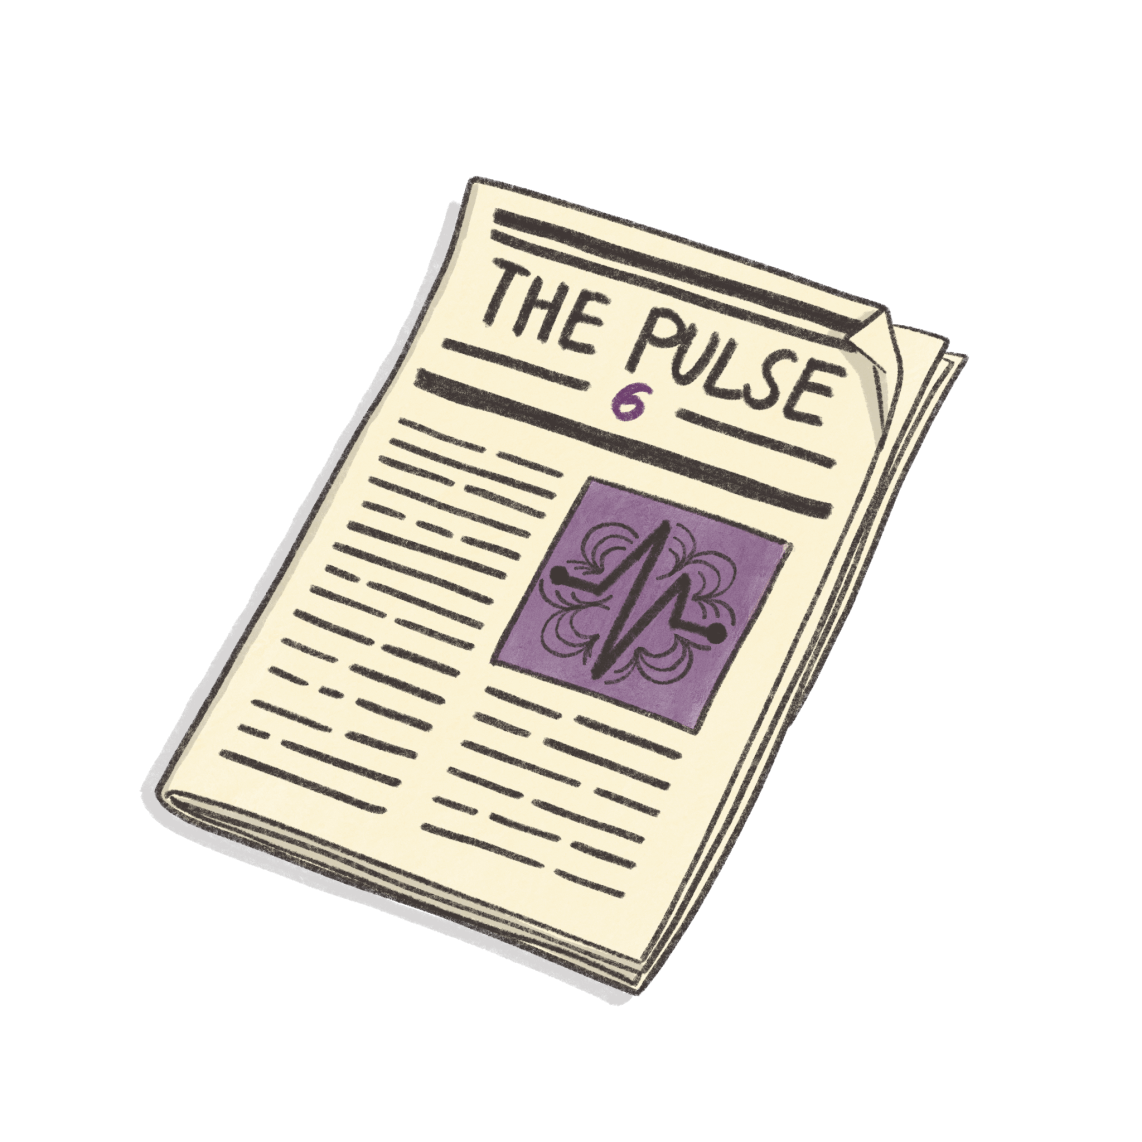 The Apoio Pulse – Issue Six